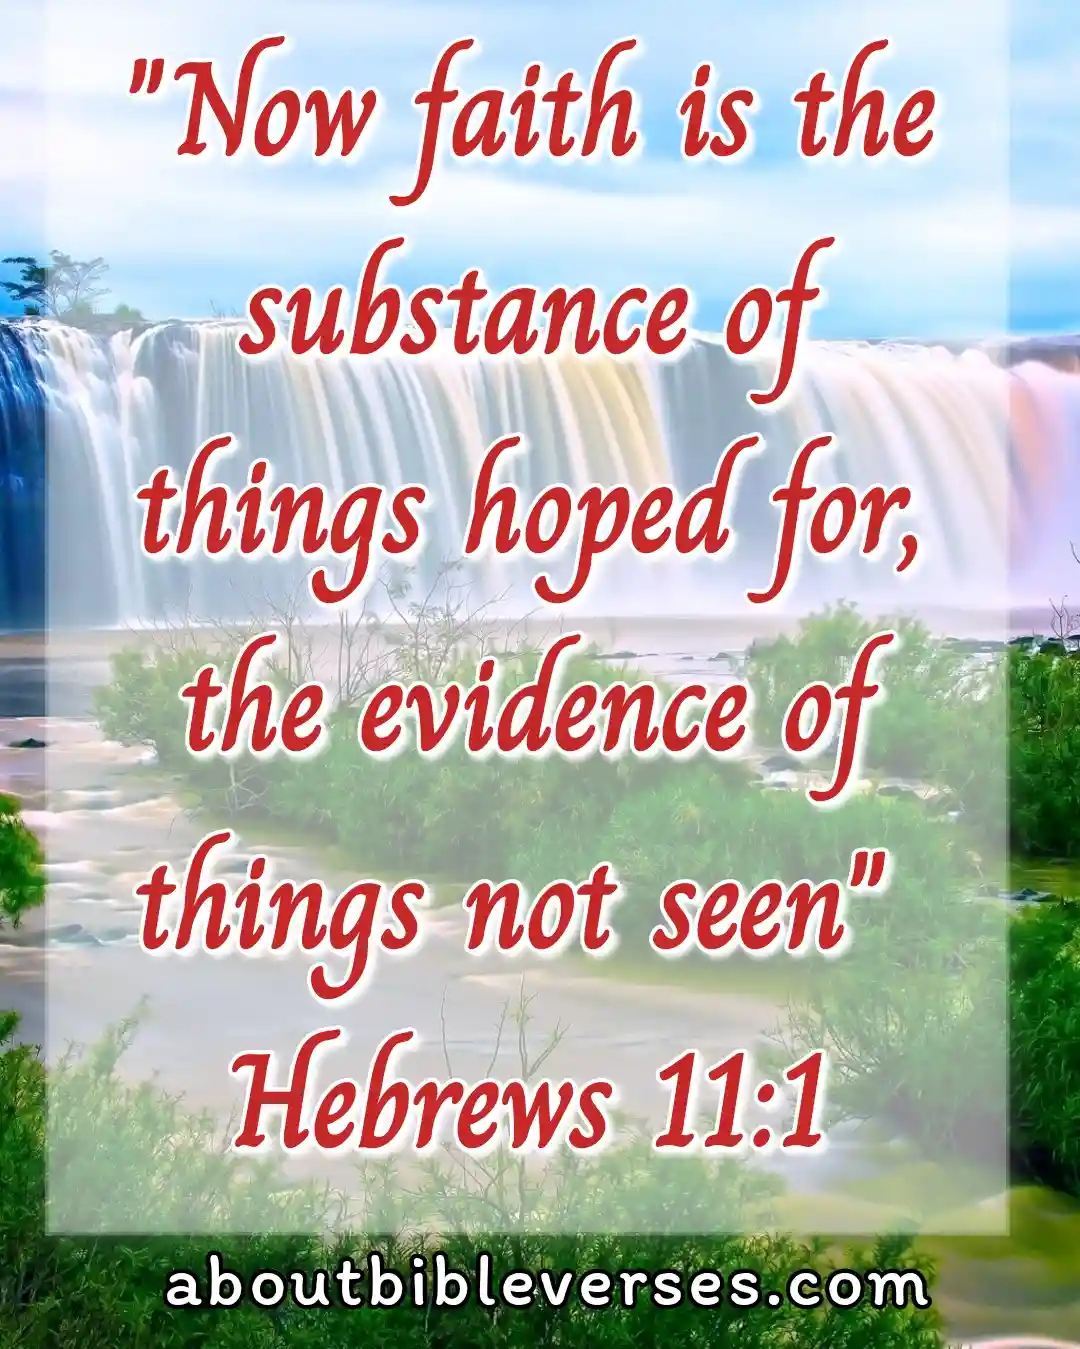 Bible Verses on Faith And Hope (Hebrews 11:1)